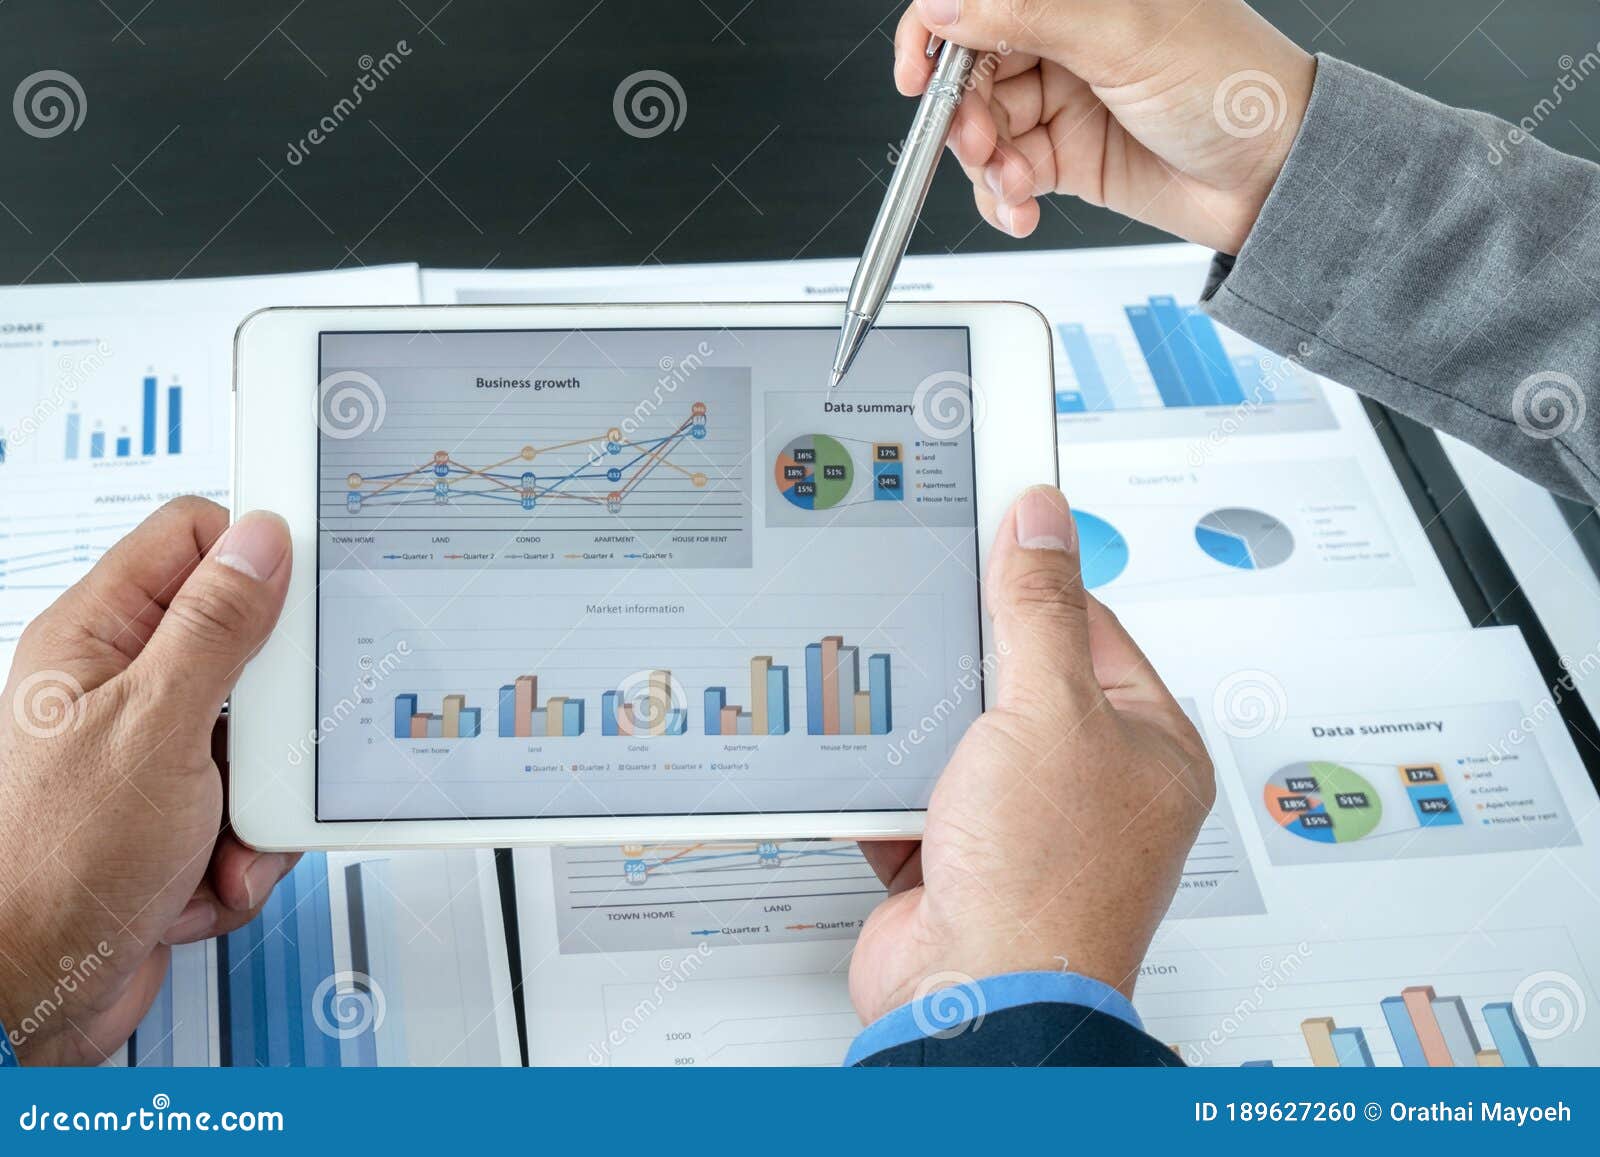 two business leaders talk about charts, financial graphs showing results are analyzing and calculating planning strategies,